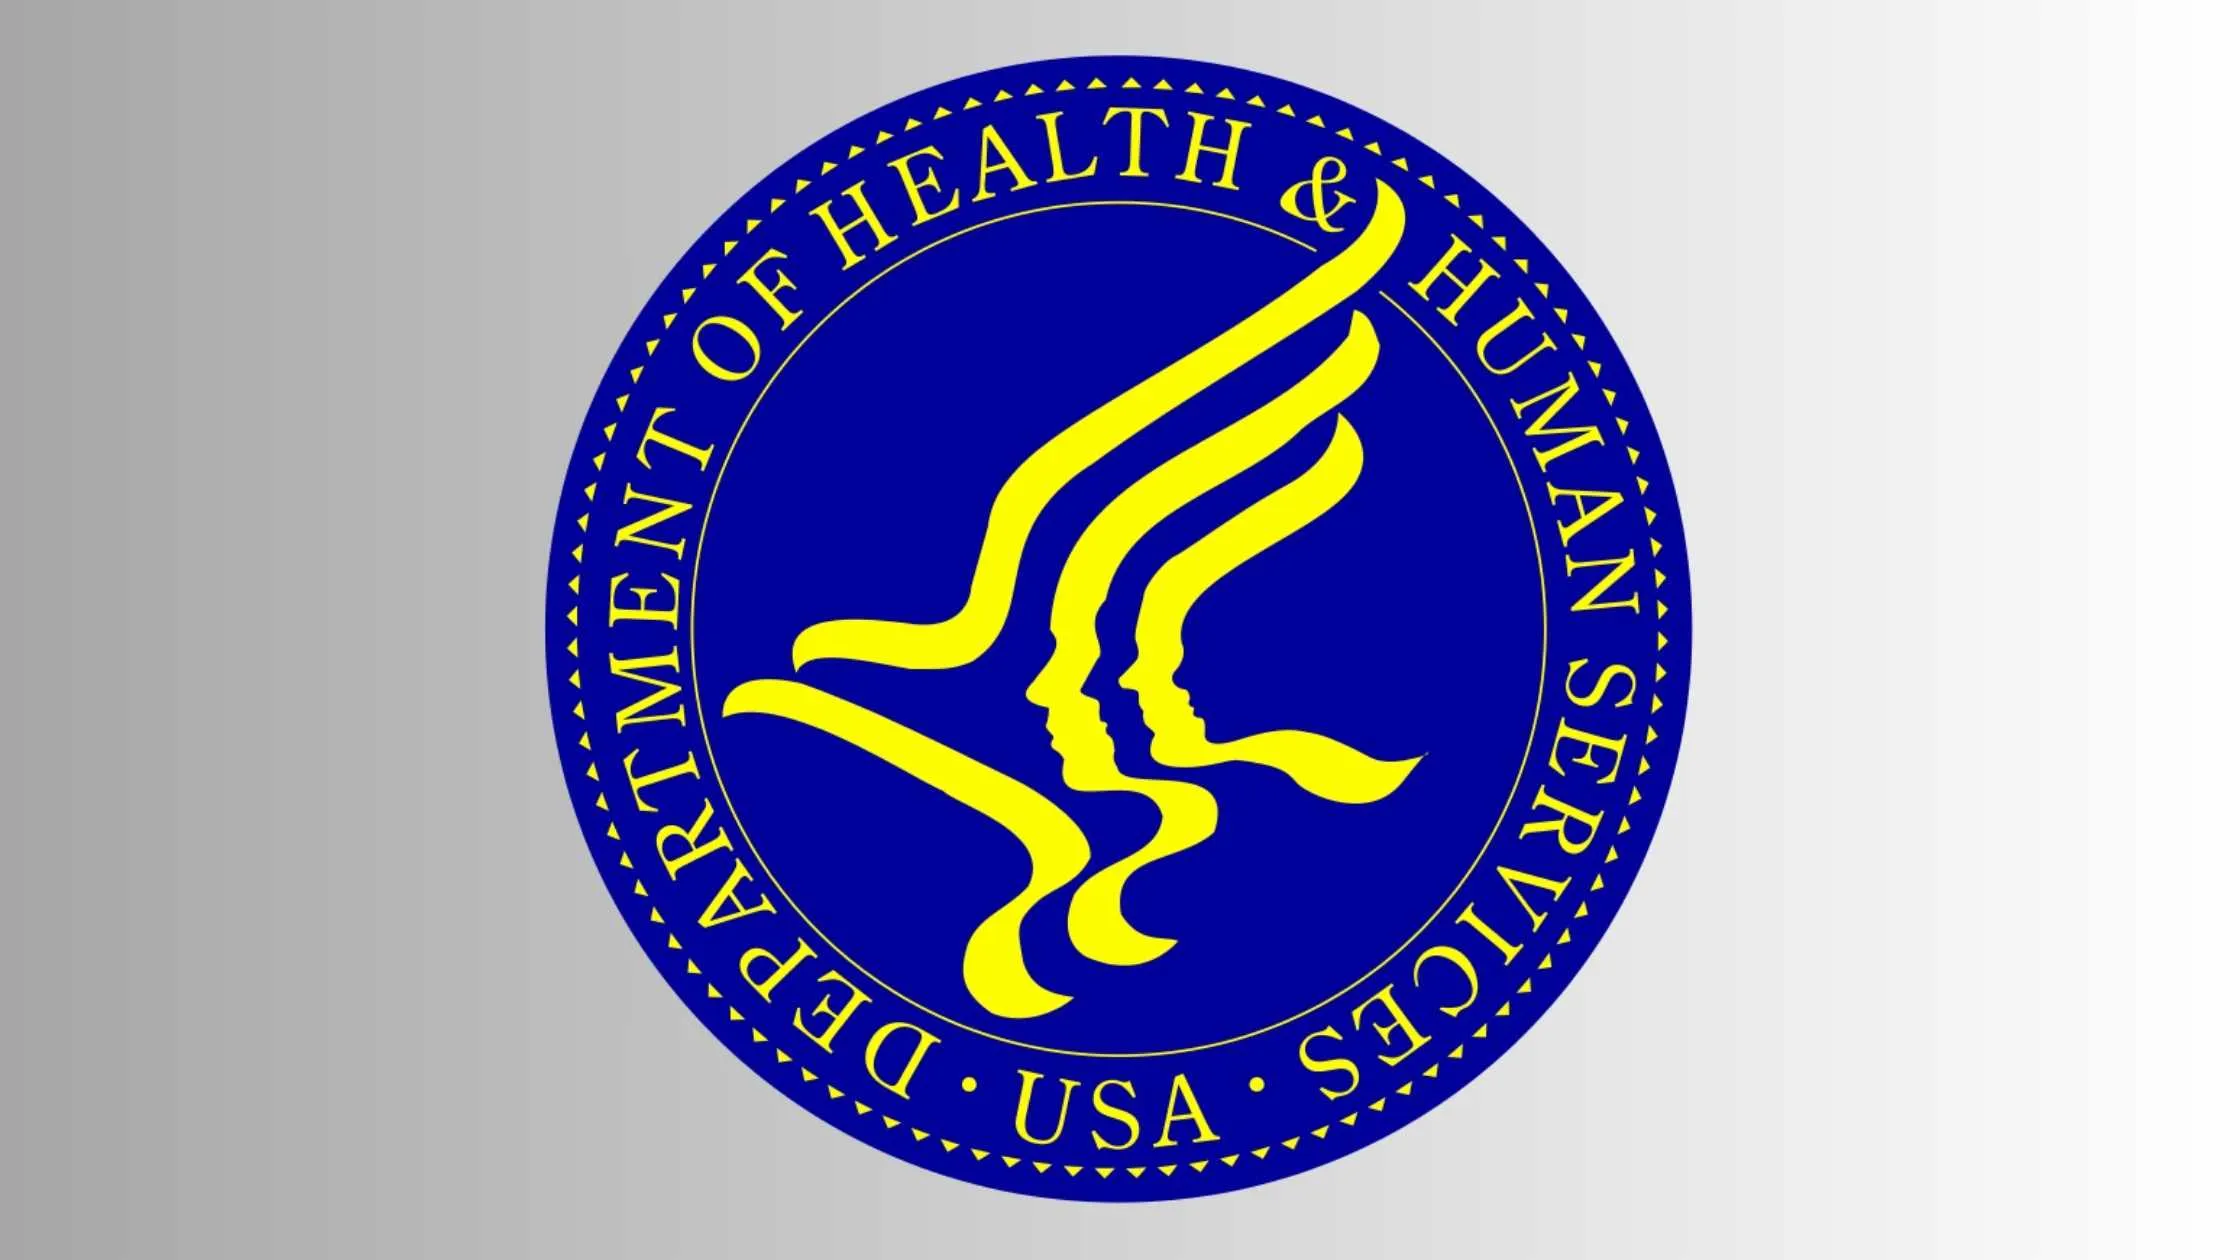 United States Department of Health and Human Services logo